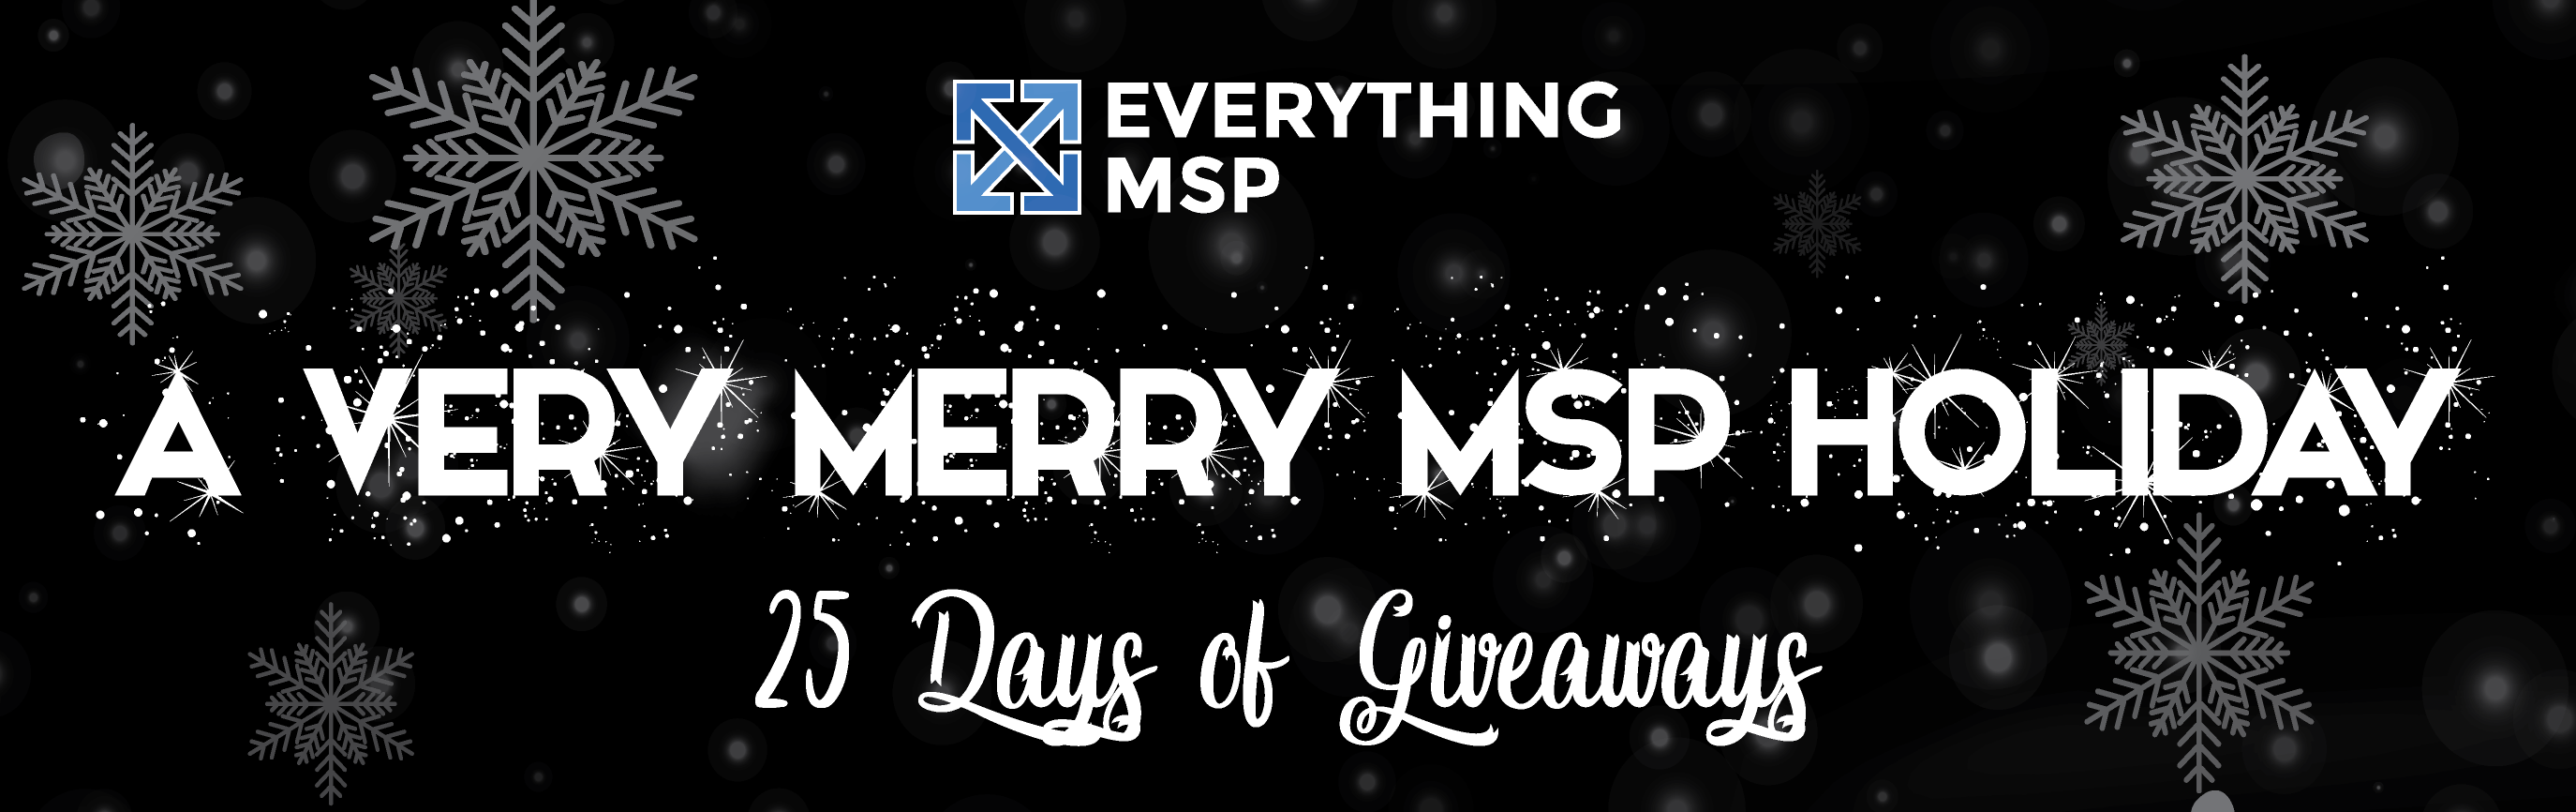 A Very Merry MSP Holidays 25 Days of Giveaways